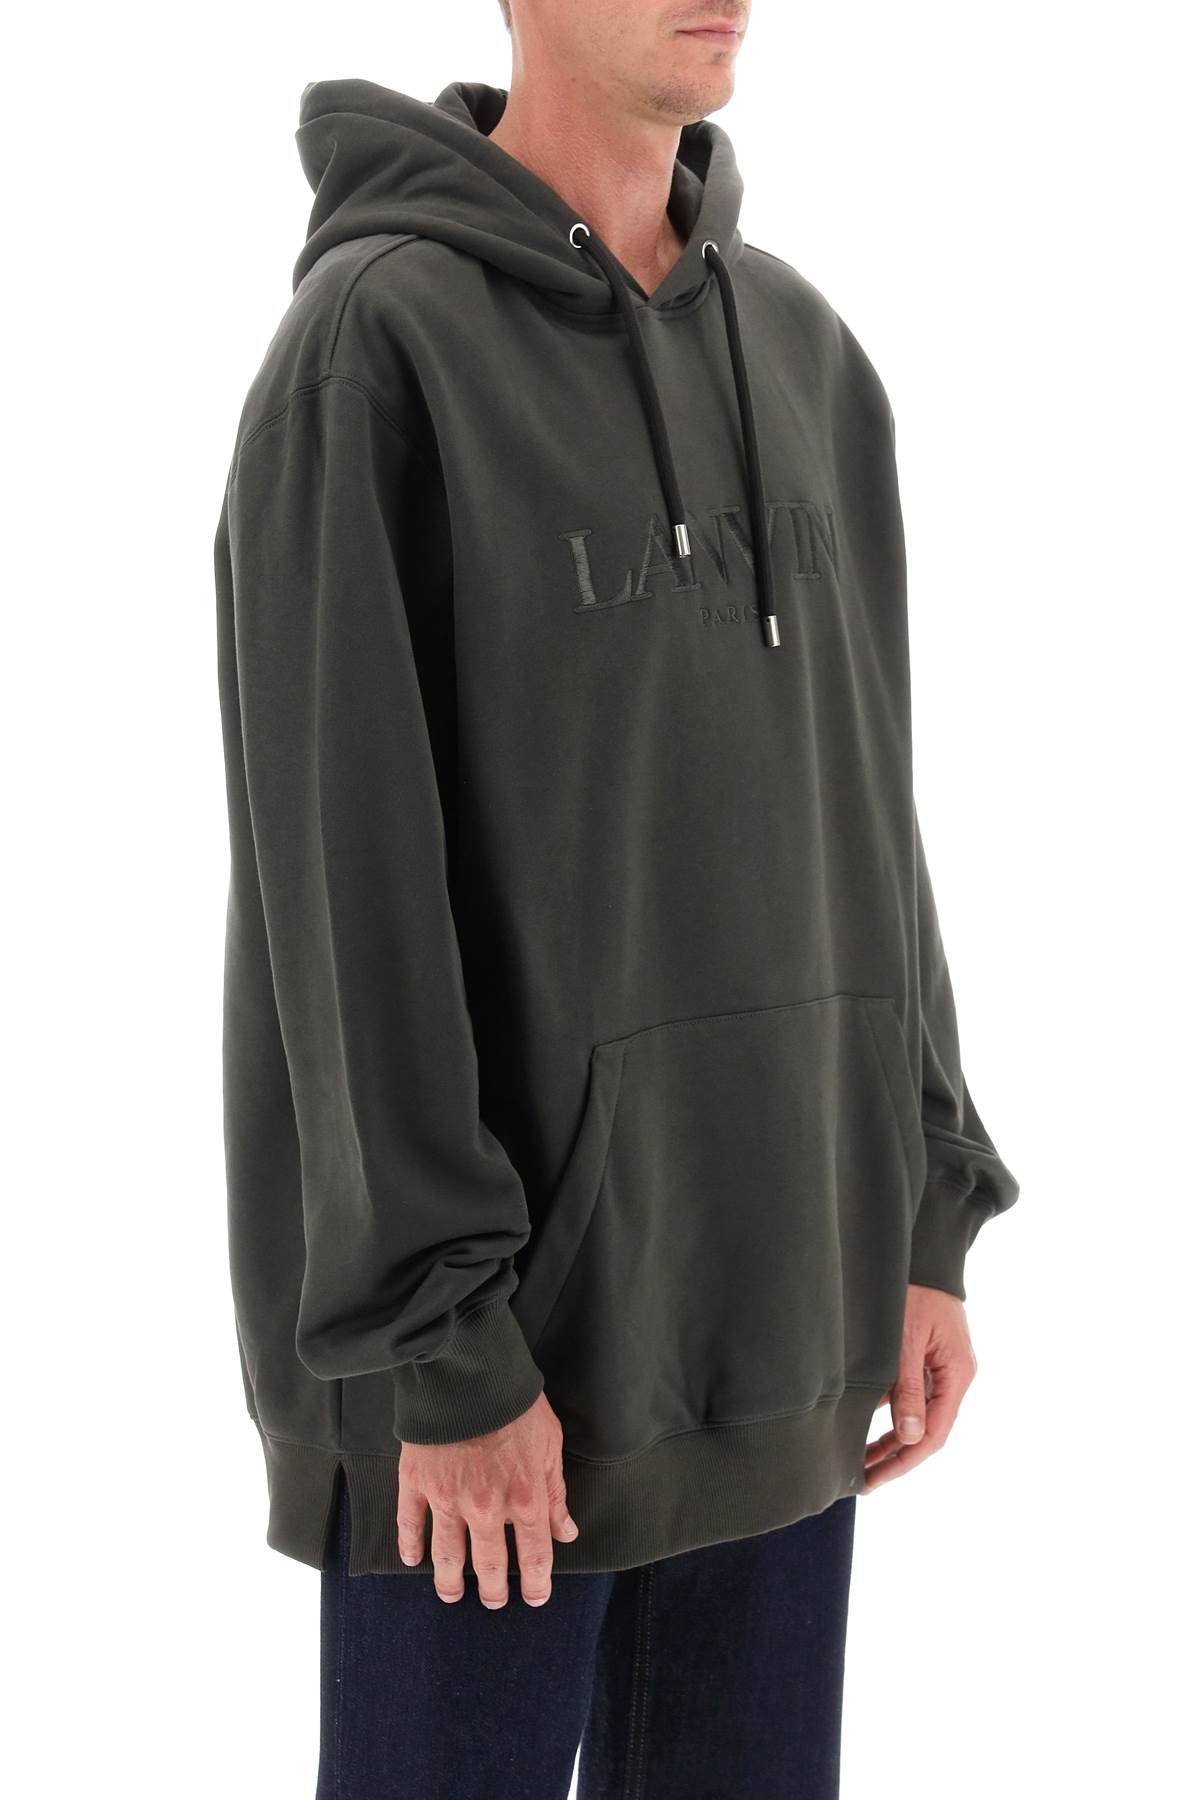 Lanvin hoodie with curb embroidery-1